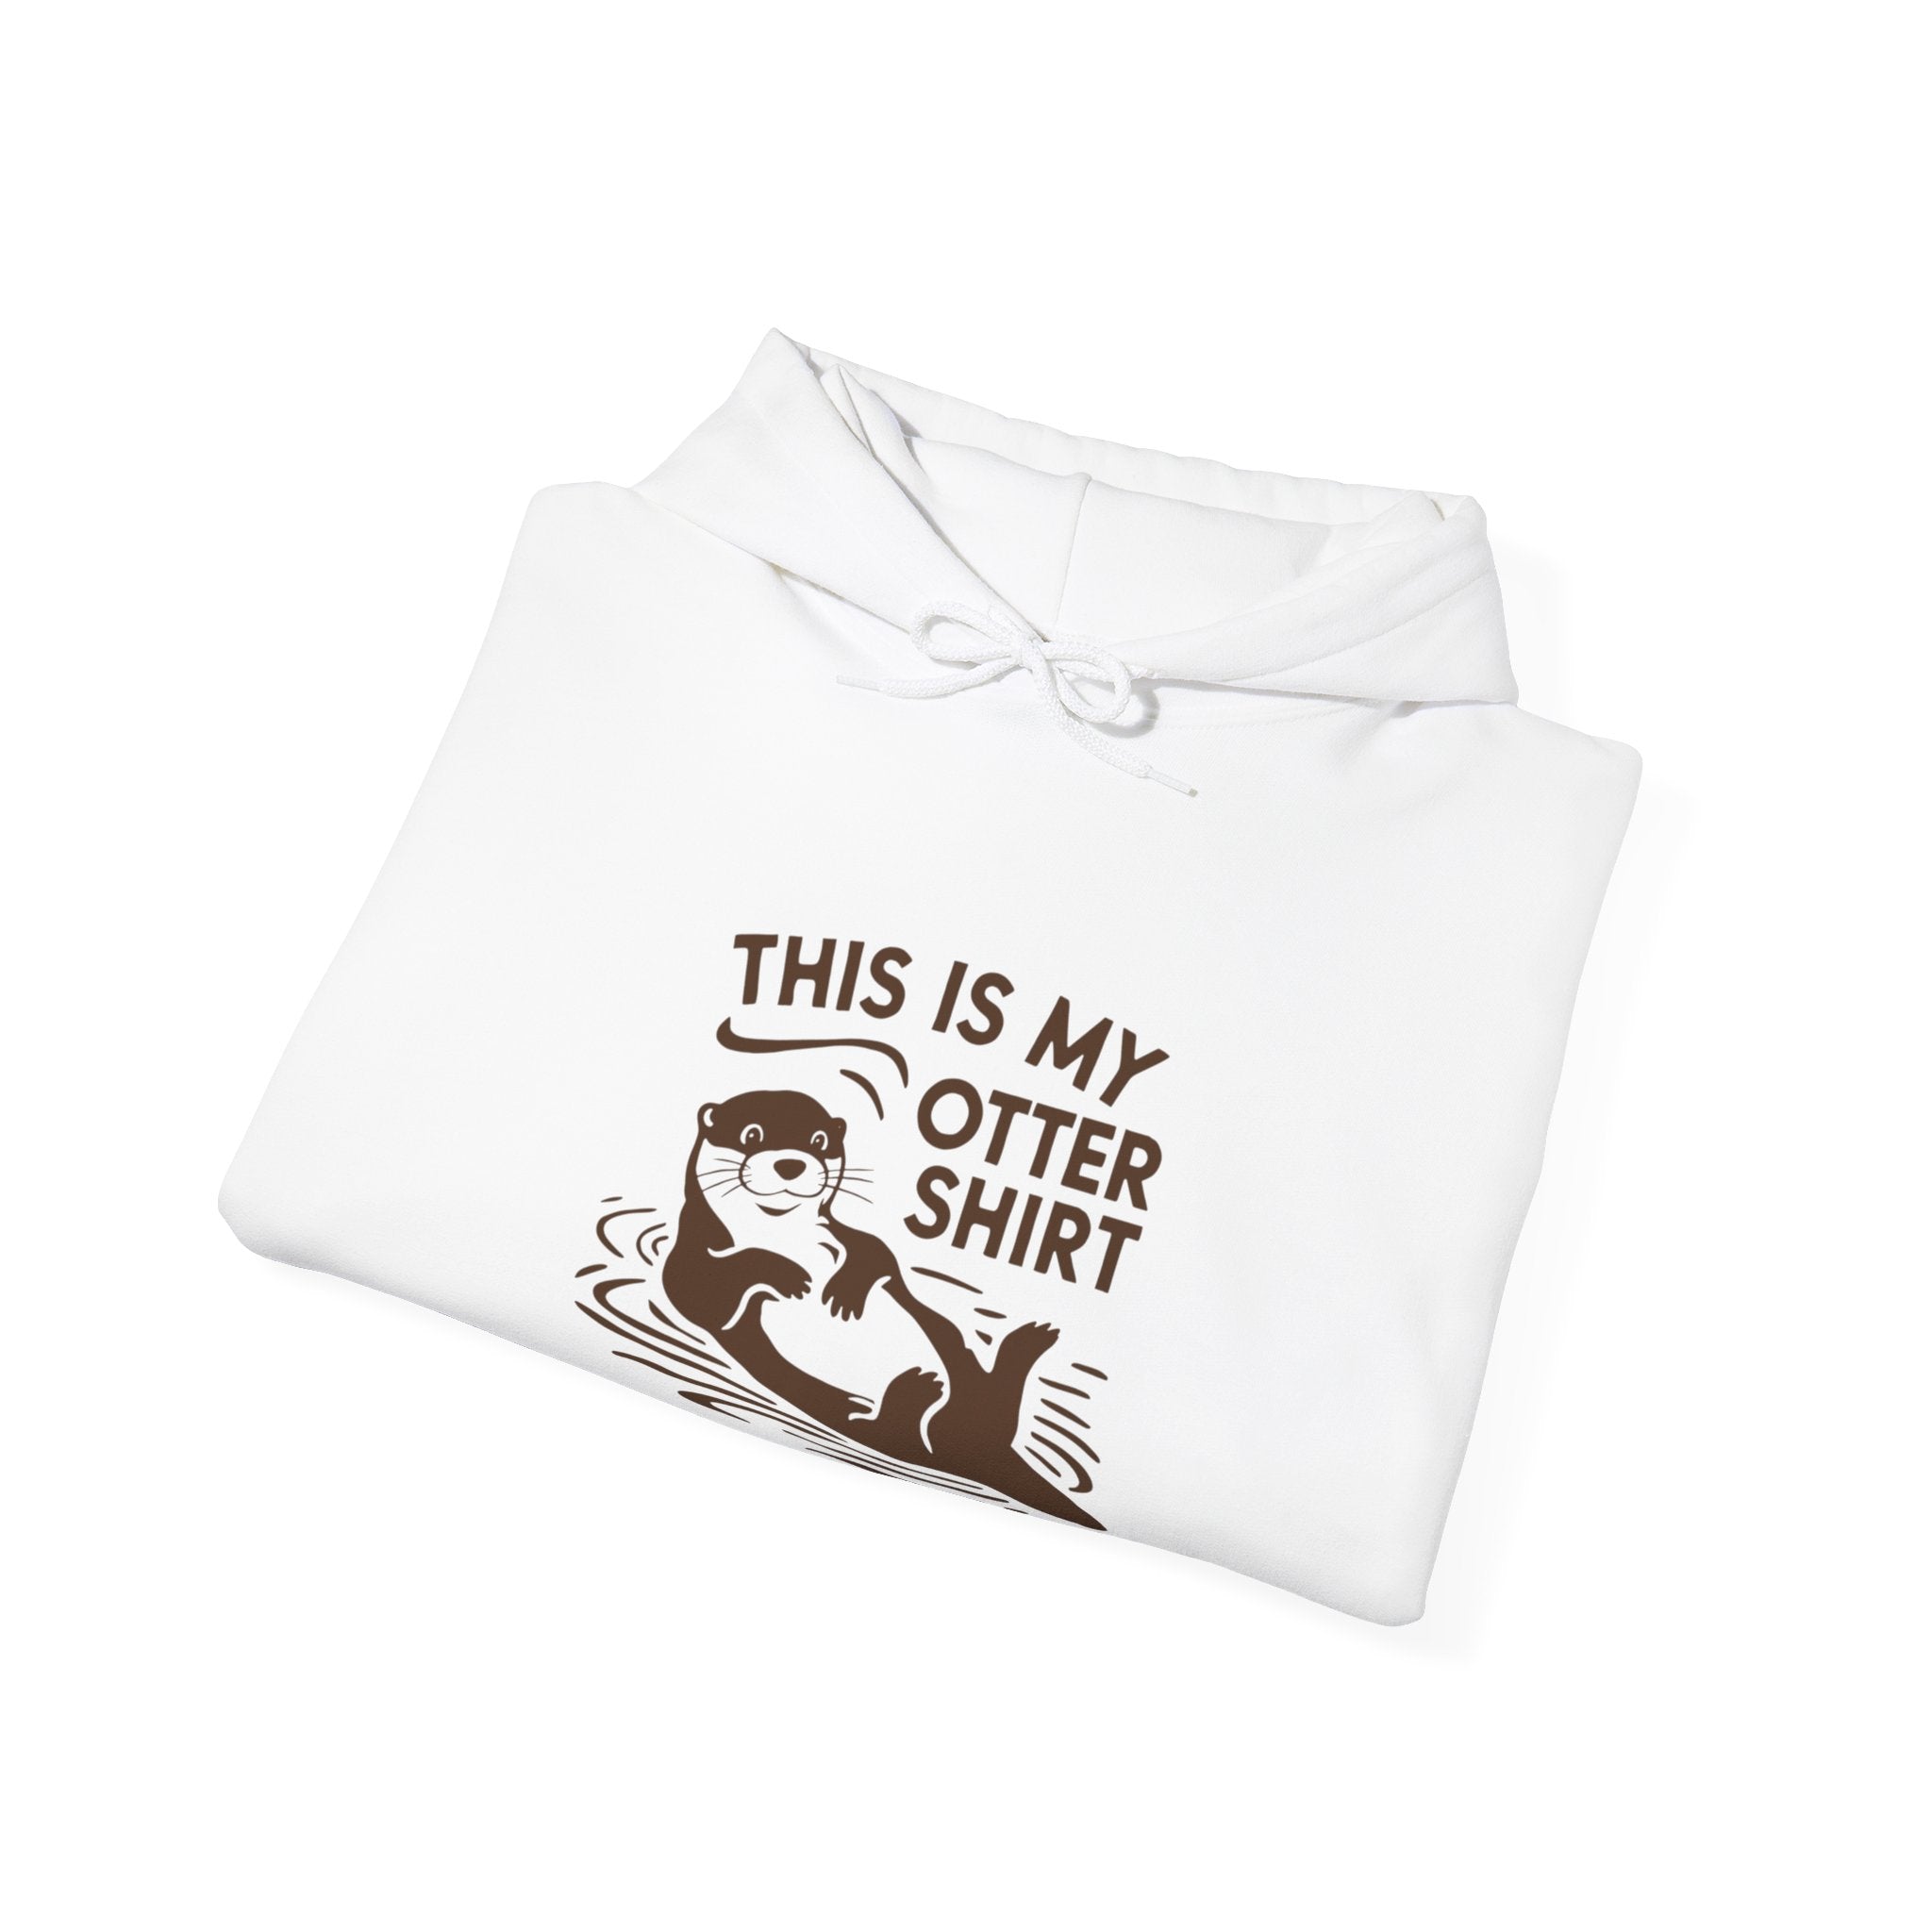 A white My Otter Shirt - Hooded Sweatshirt featuring a graphic of an otter and the text "THIS IS MY OTTER SHIRT" printed in brown, perfect for a cozy interior.